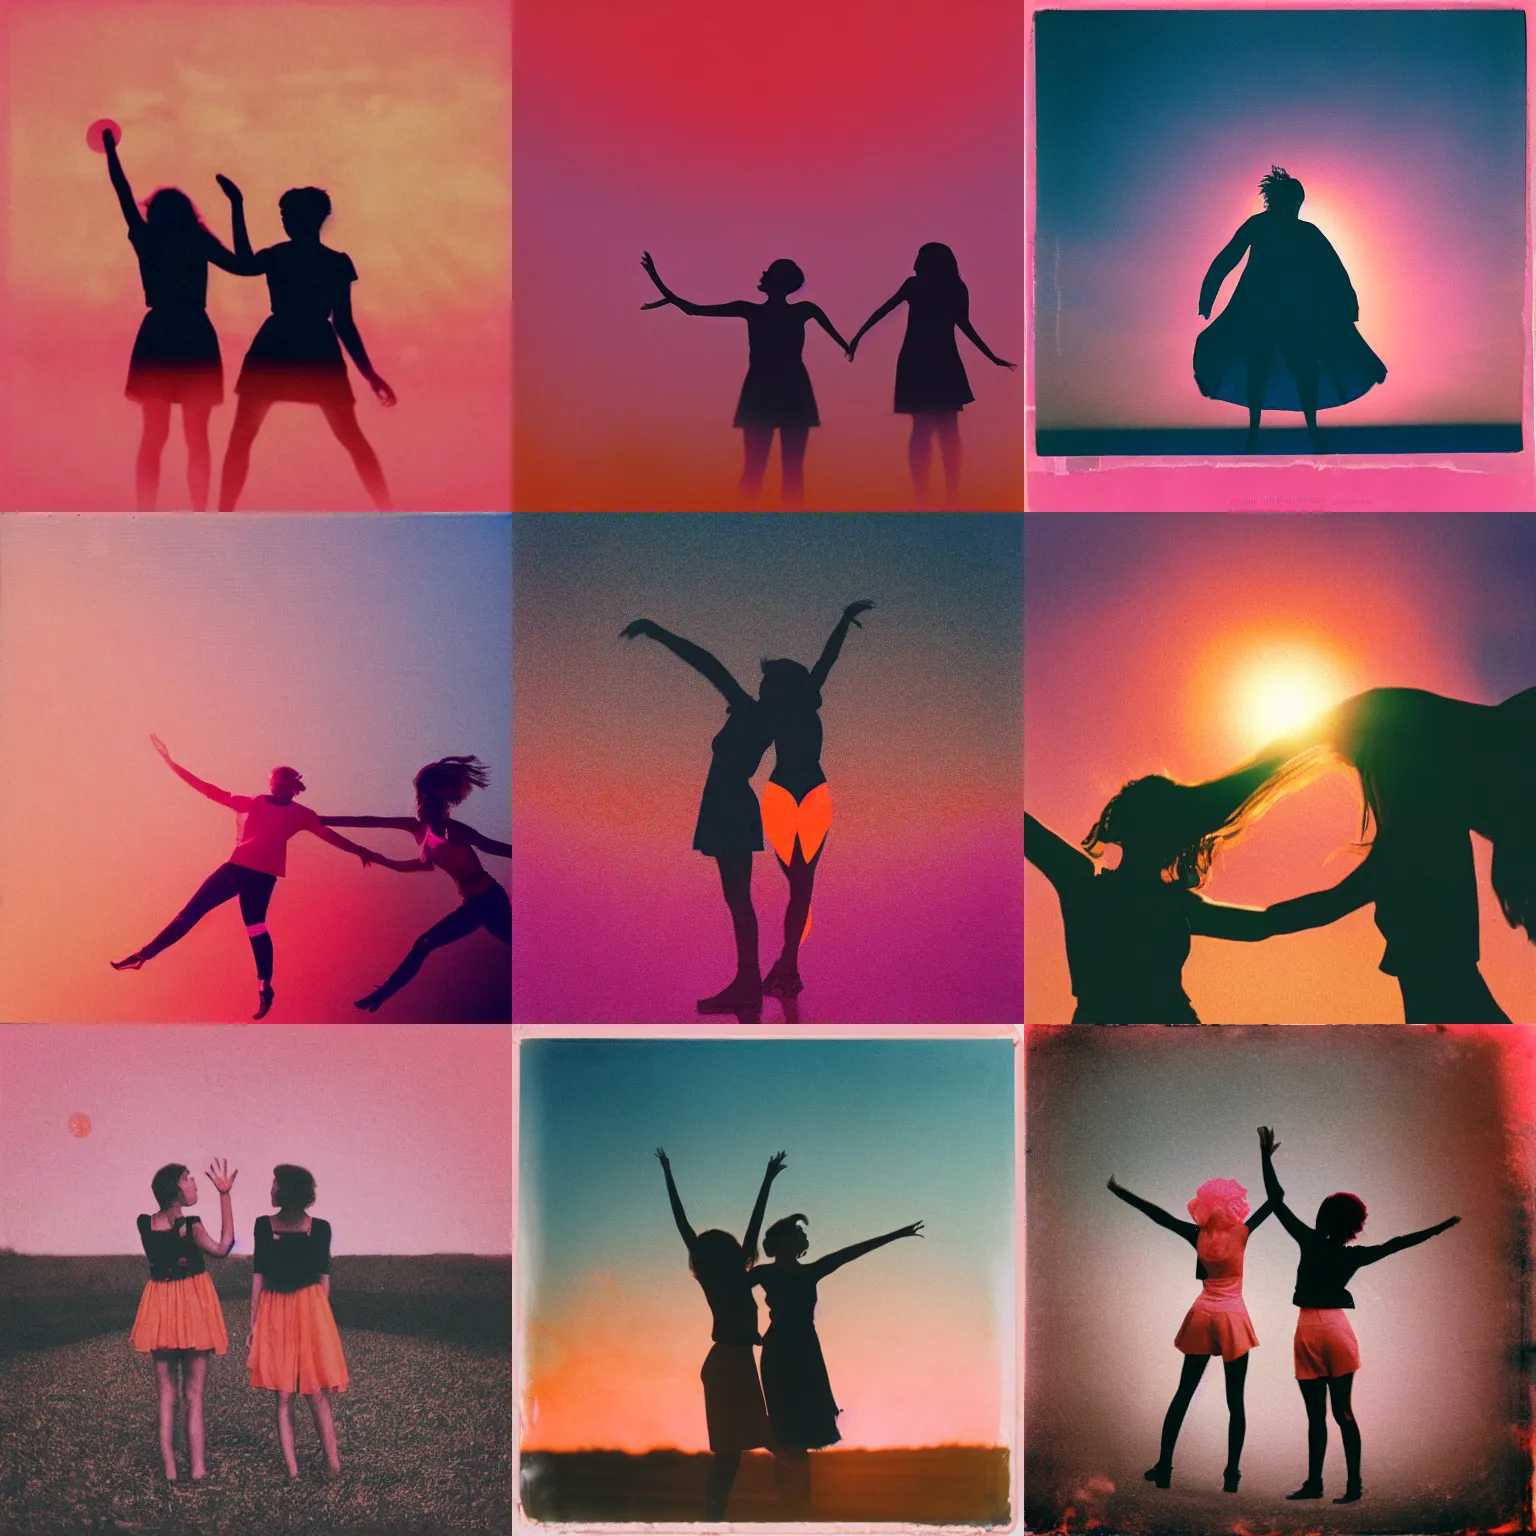 Prompt: pink and orange expired film photograph of two women reaching towards the sun, silhouette, grainy film photograph, album artwork, aesthetic